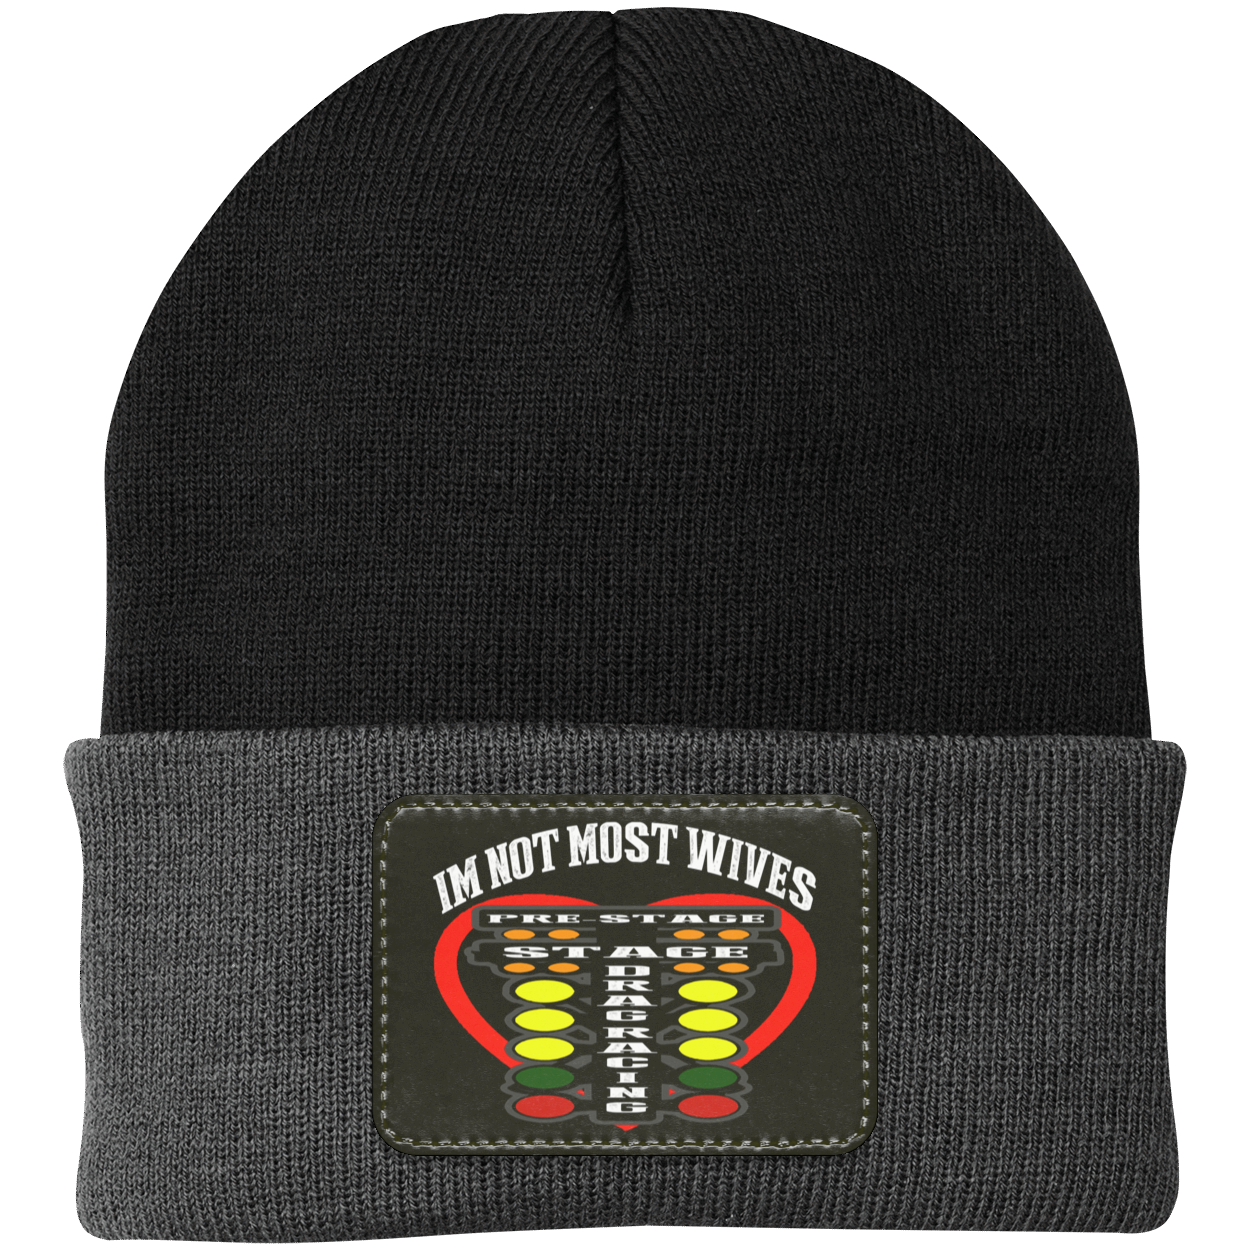 I'm Not Most Wives Drag Racing Knit Cap - Patch